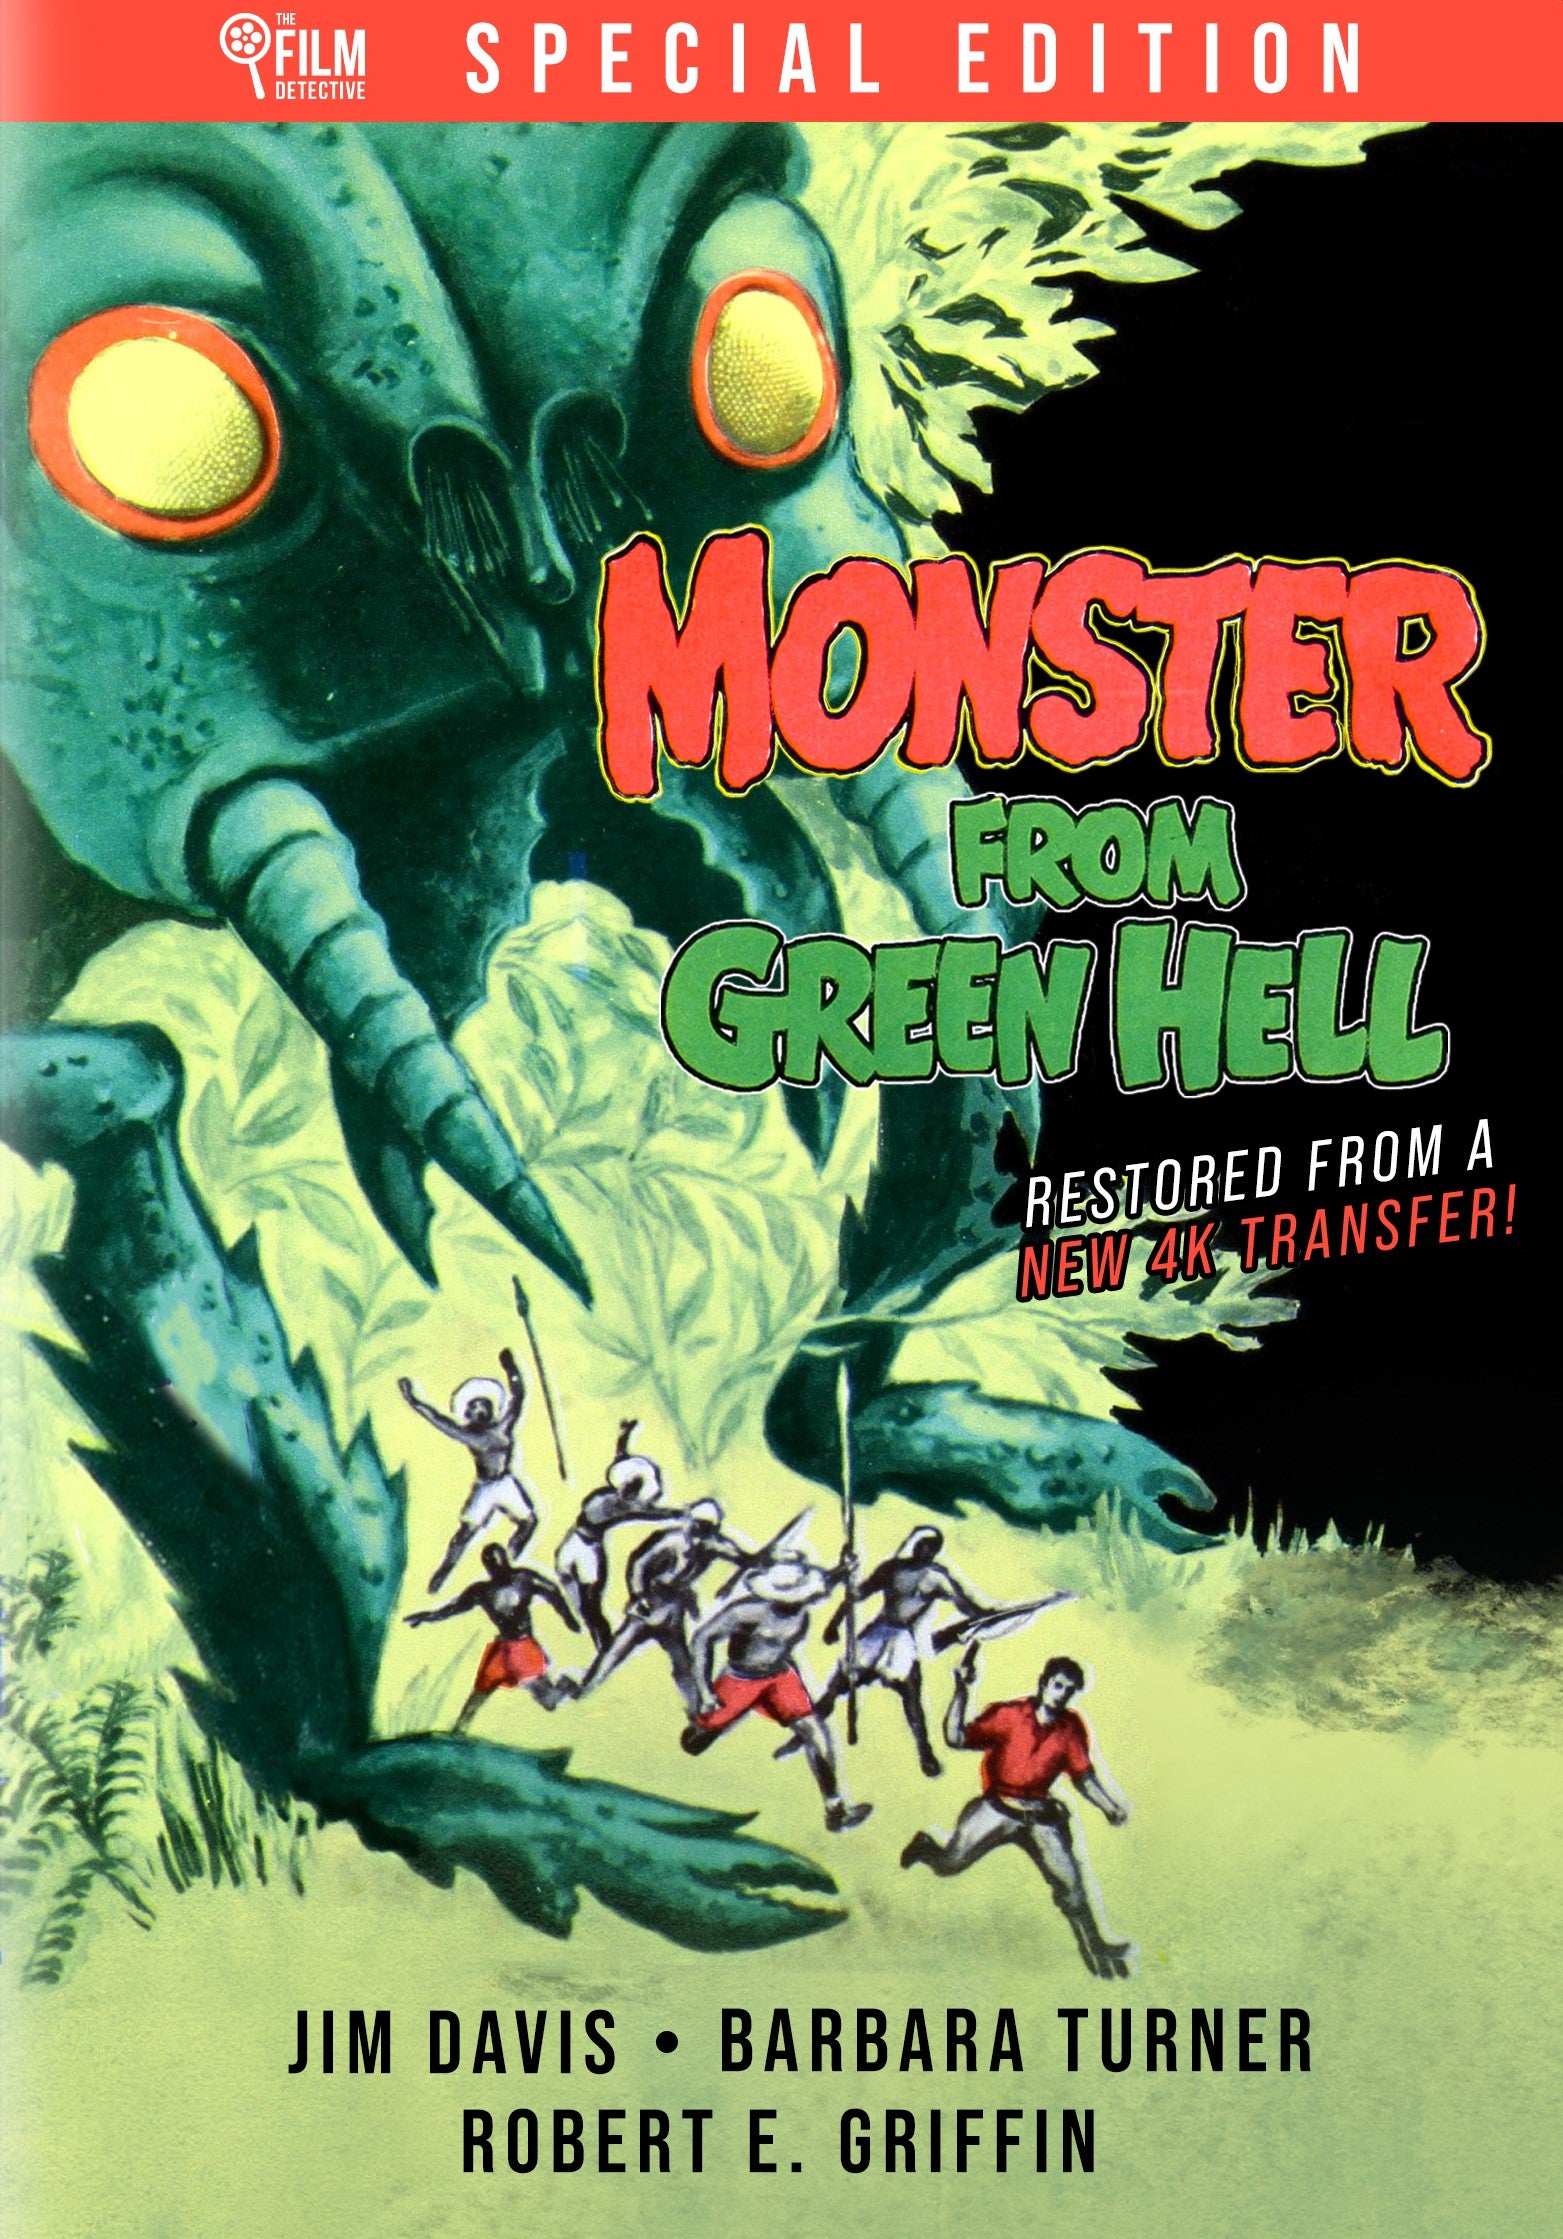 MONSTER FROM GREEN HELL DVD